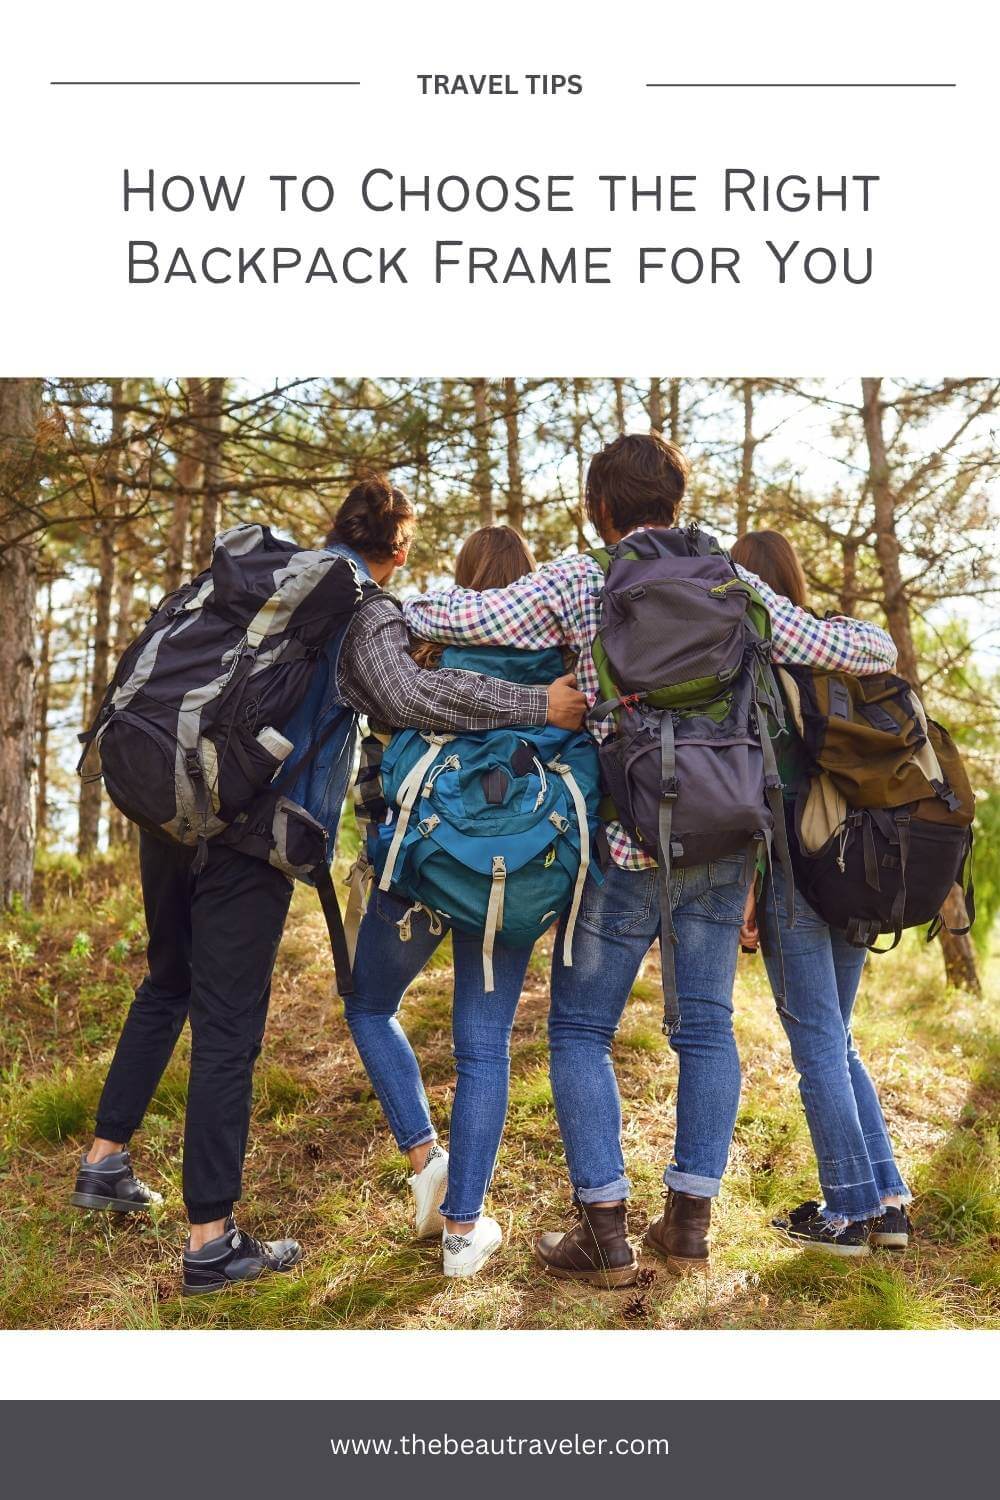 Top Travel Hacks: Maximizing Comfort with the Right Backpack Frame - The BeauTraveler